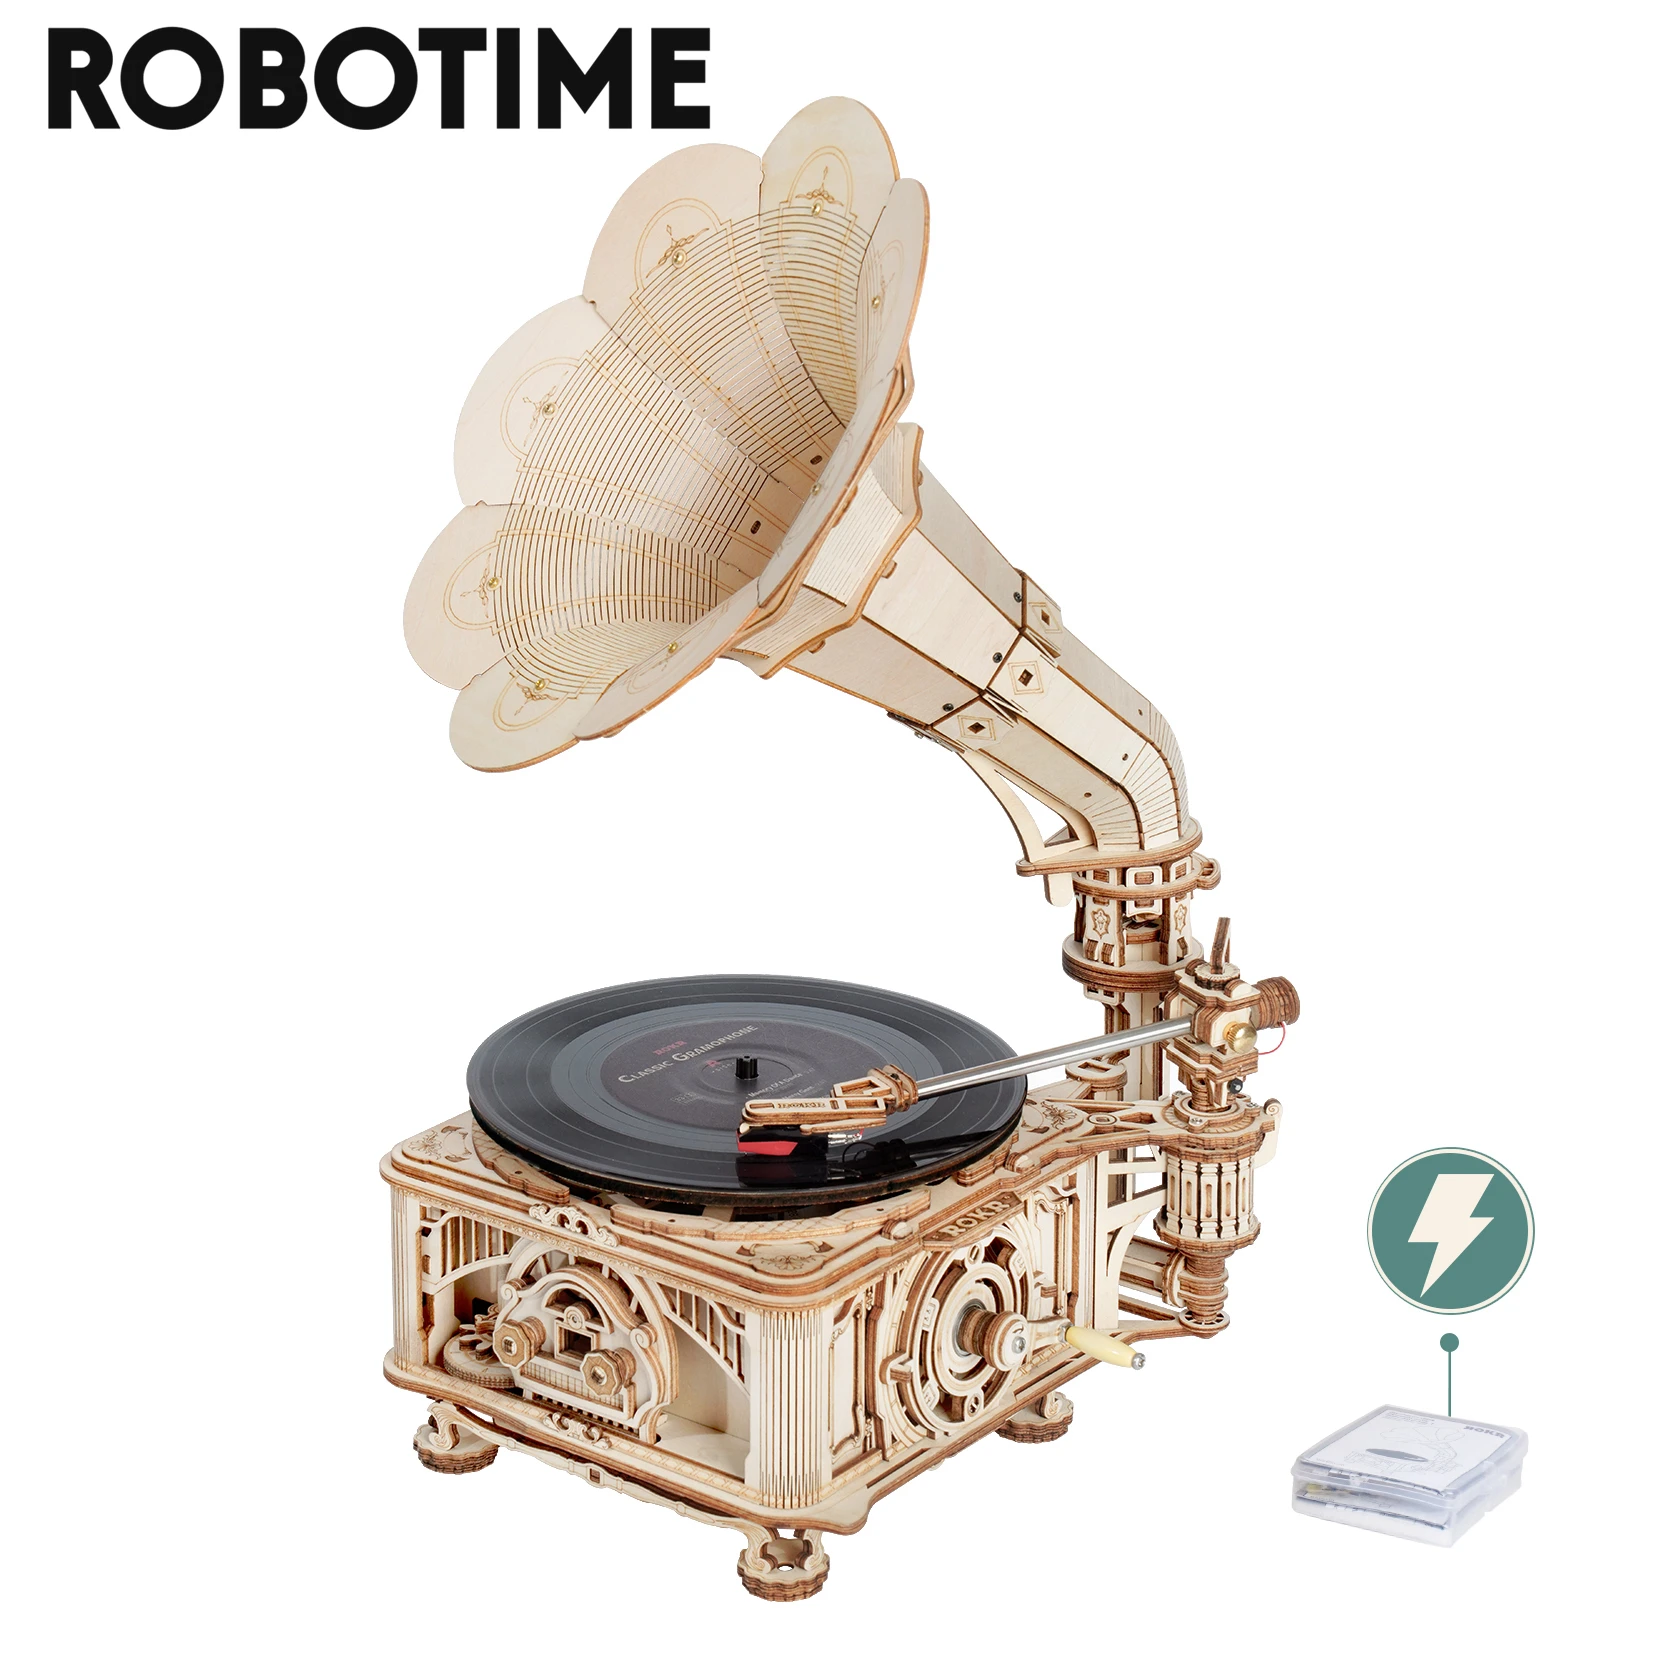 3D Puzzle of a Desk Clock Wooden DIY Model Kit of a Gramophone Music Jigsaw 